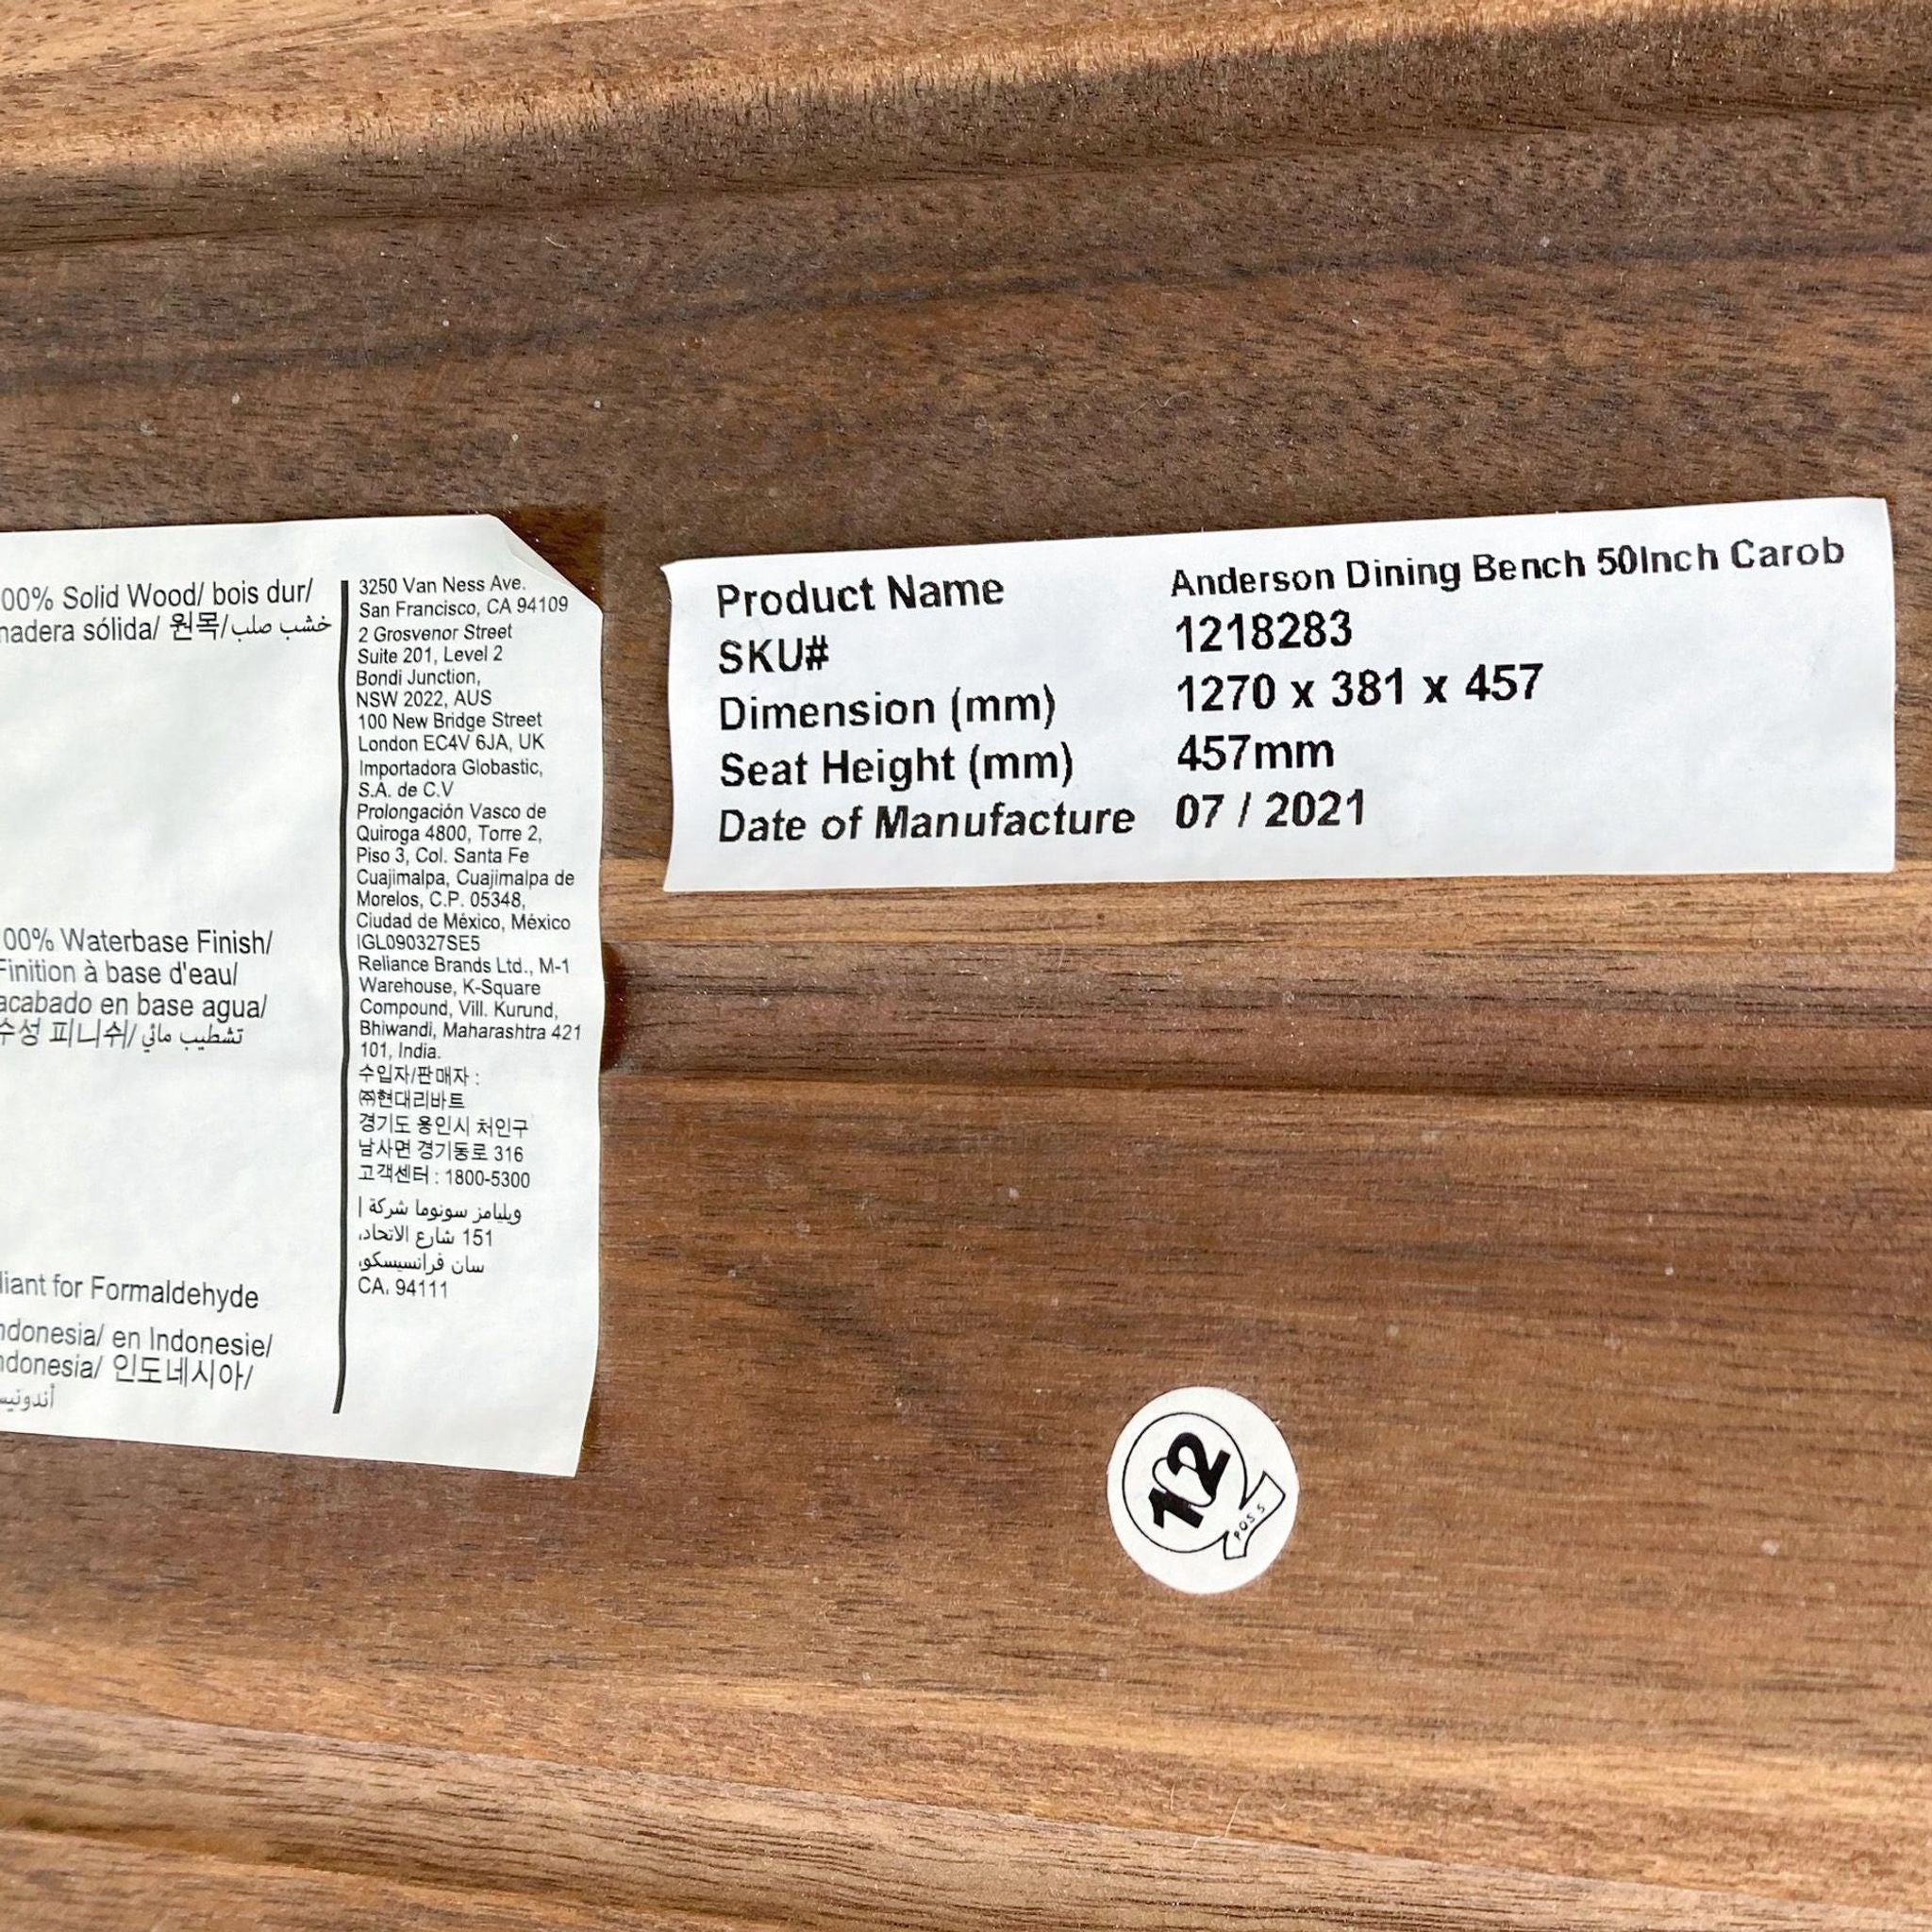 Close-up of product label on Anderson 50" Dining Bench showing SKU, dimensions, and manufacture date.